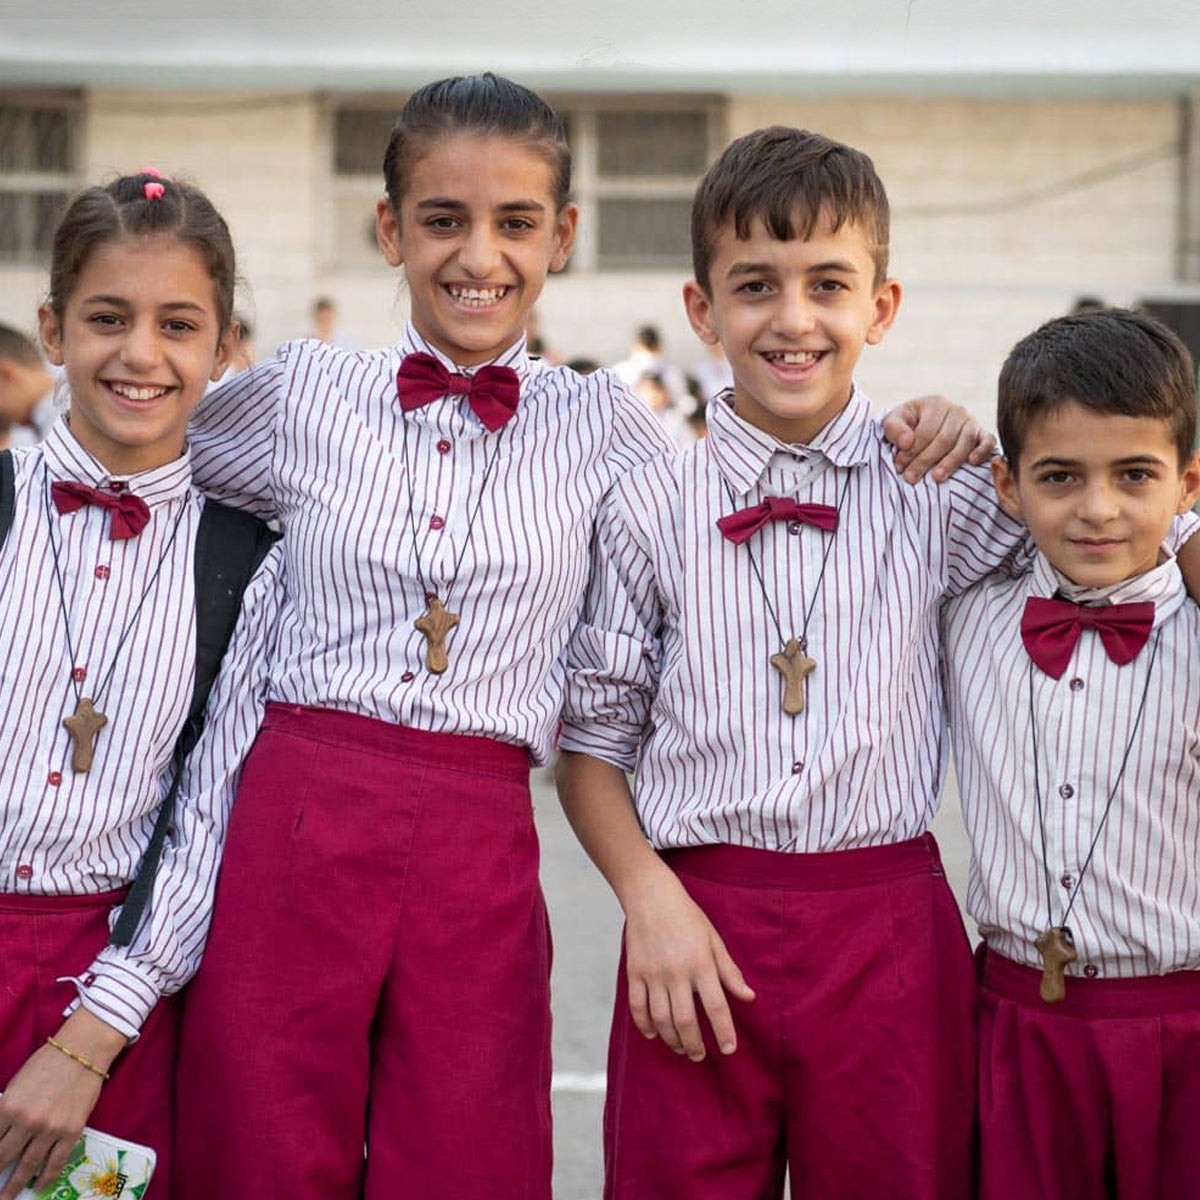 Wisam's children dressed in uniforms for school - part of their new life in a new land.